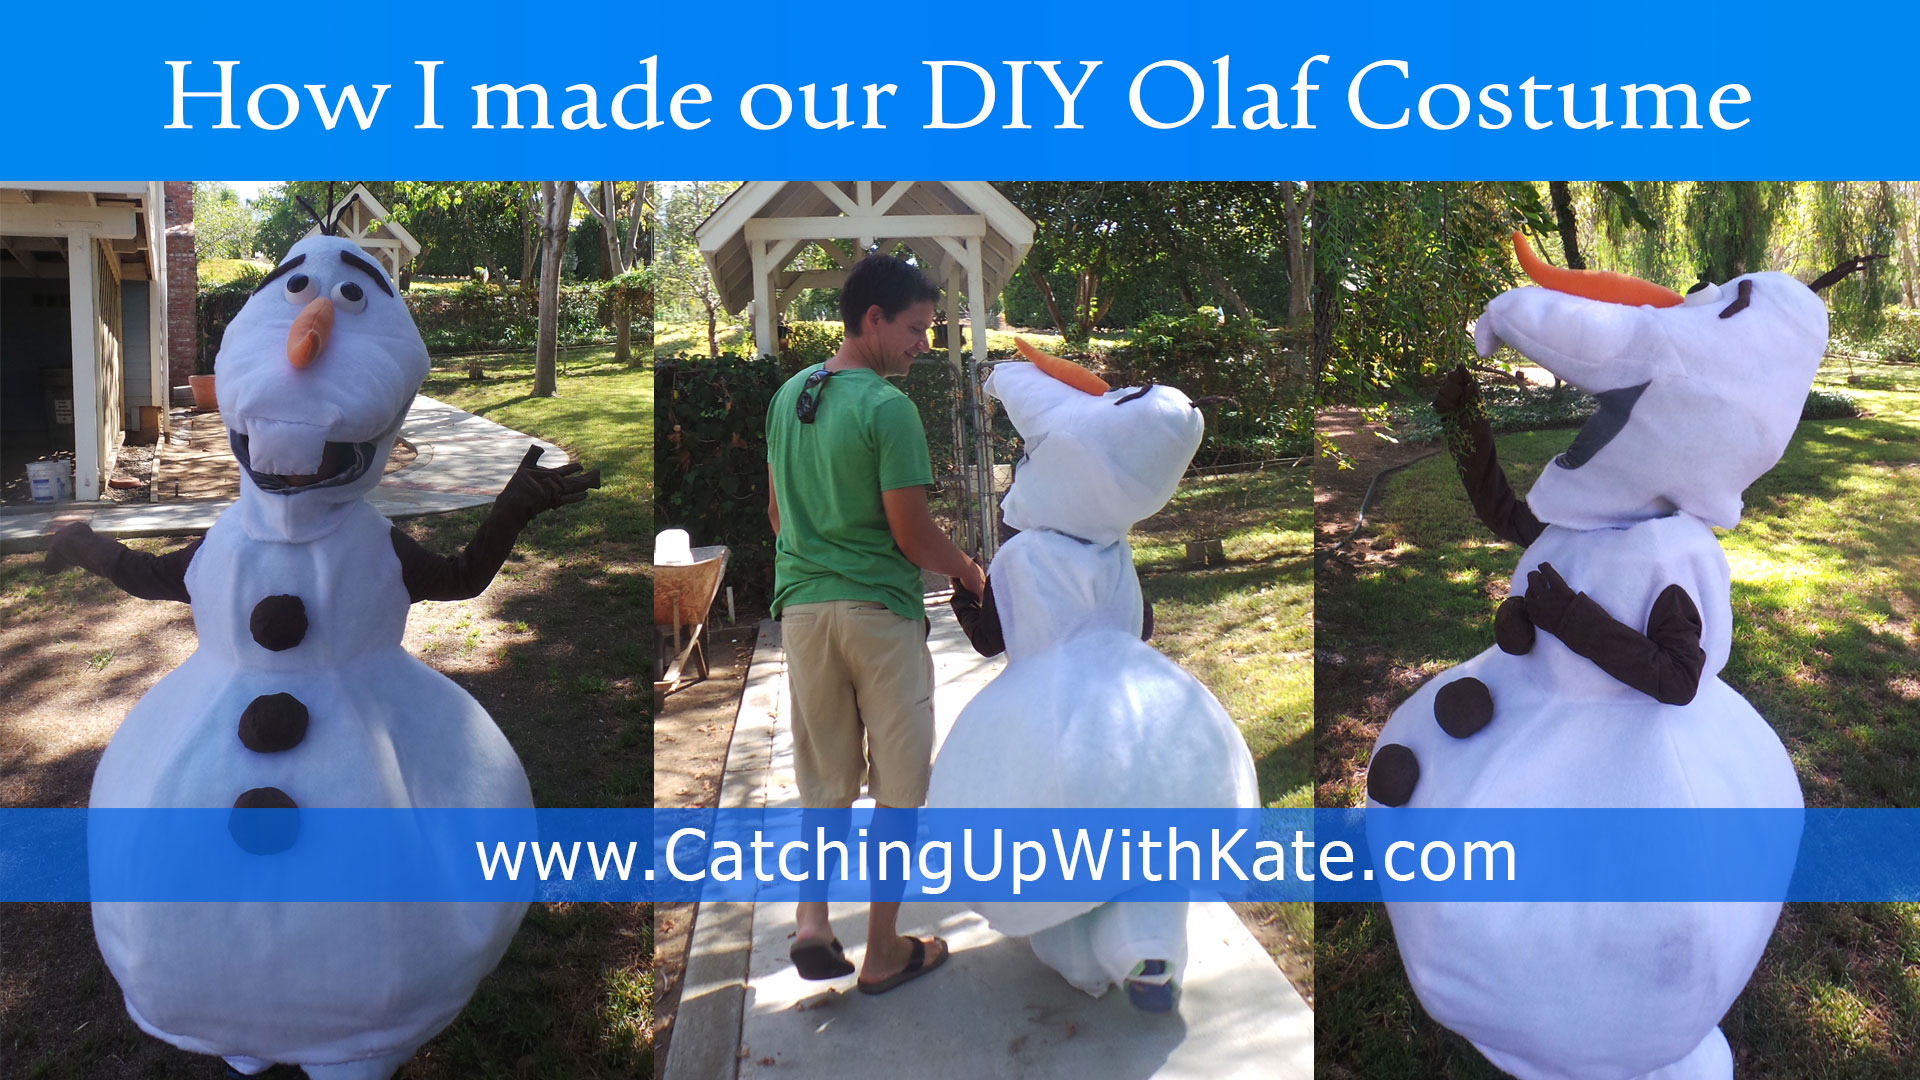 DIY Olaf Costume Instructions Along the Way